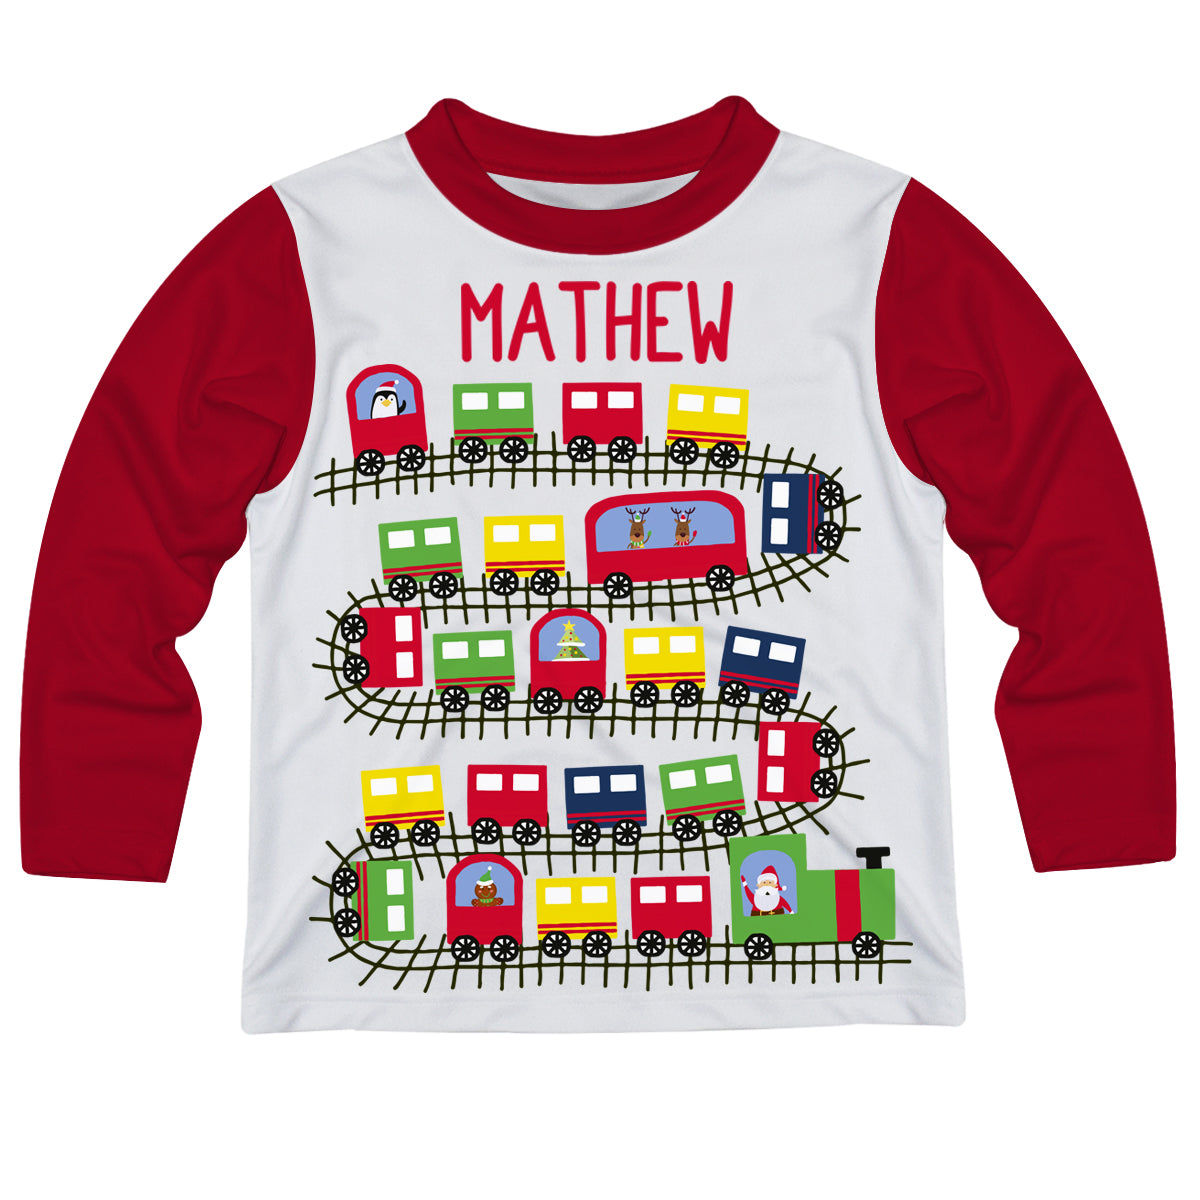 Boys white and red Santa tee shirt with name - Wimziy&Co.